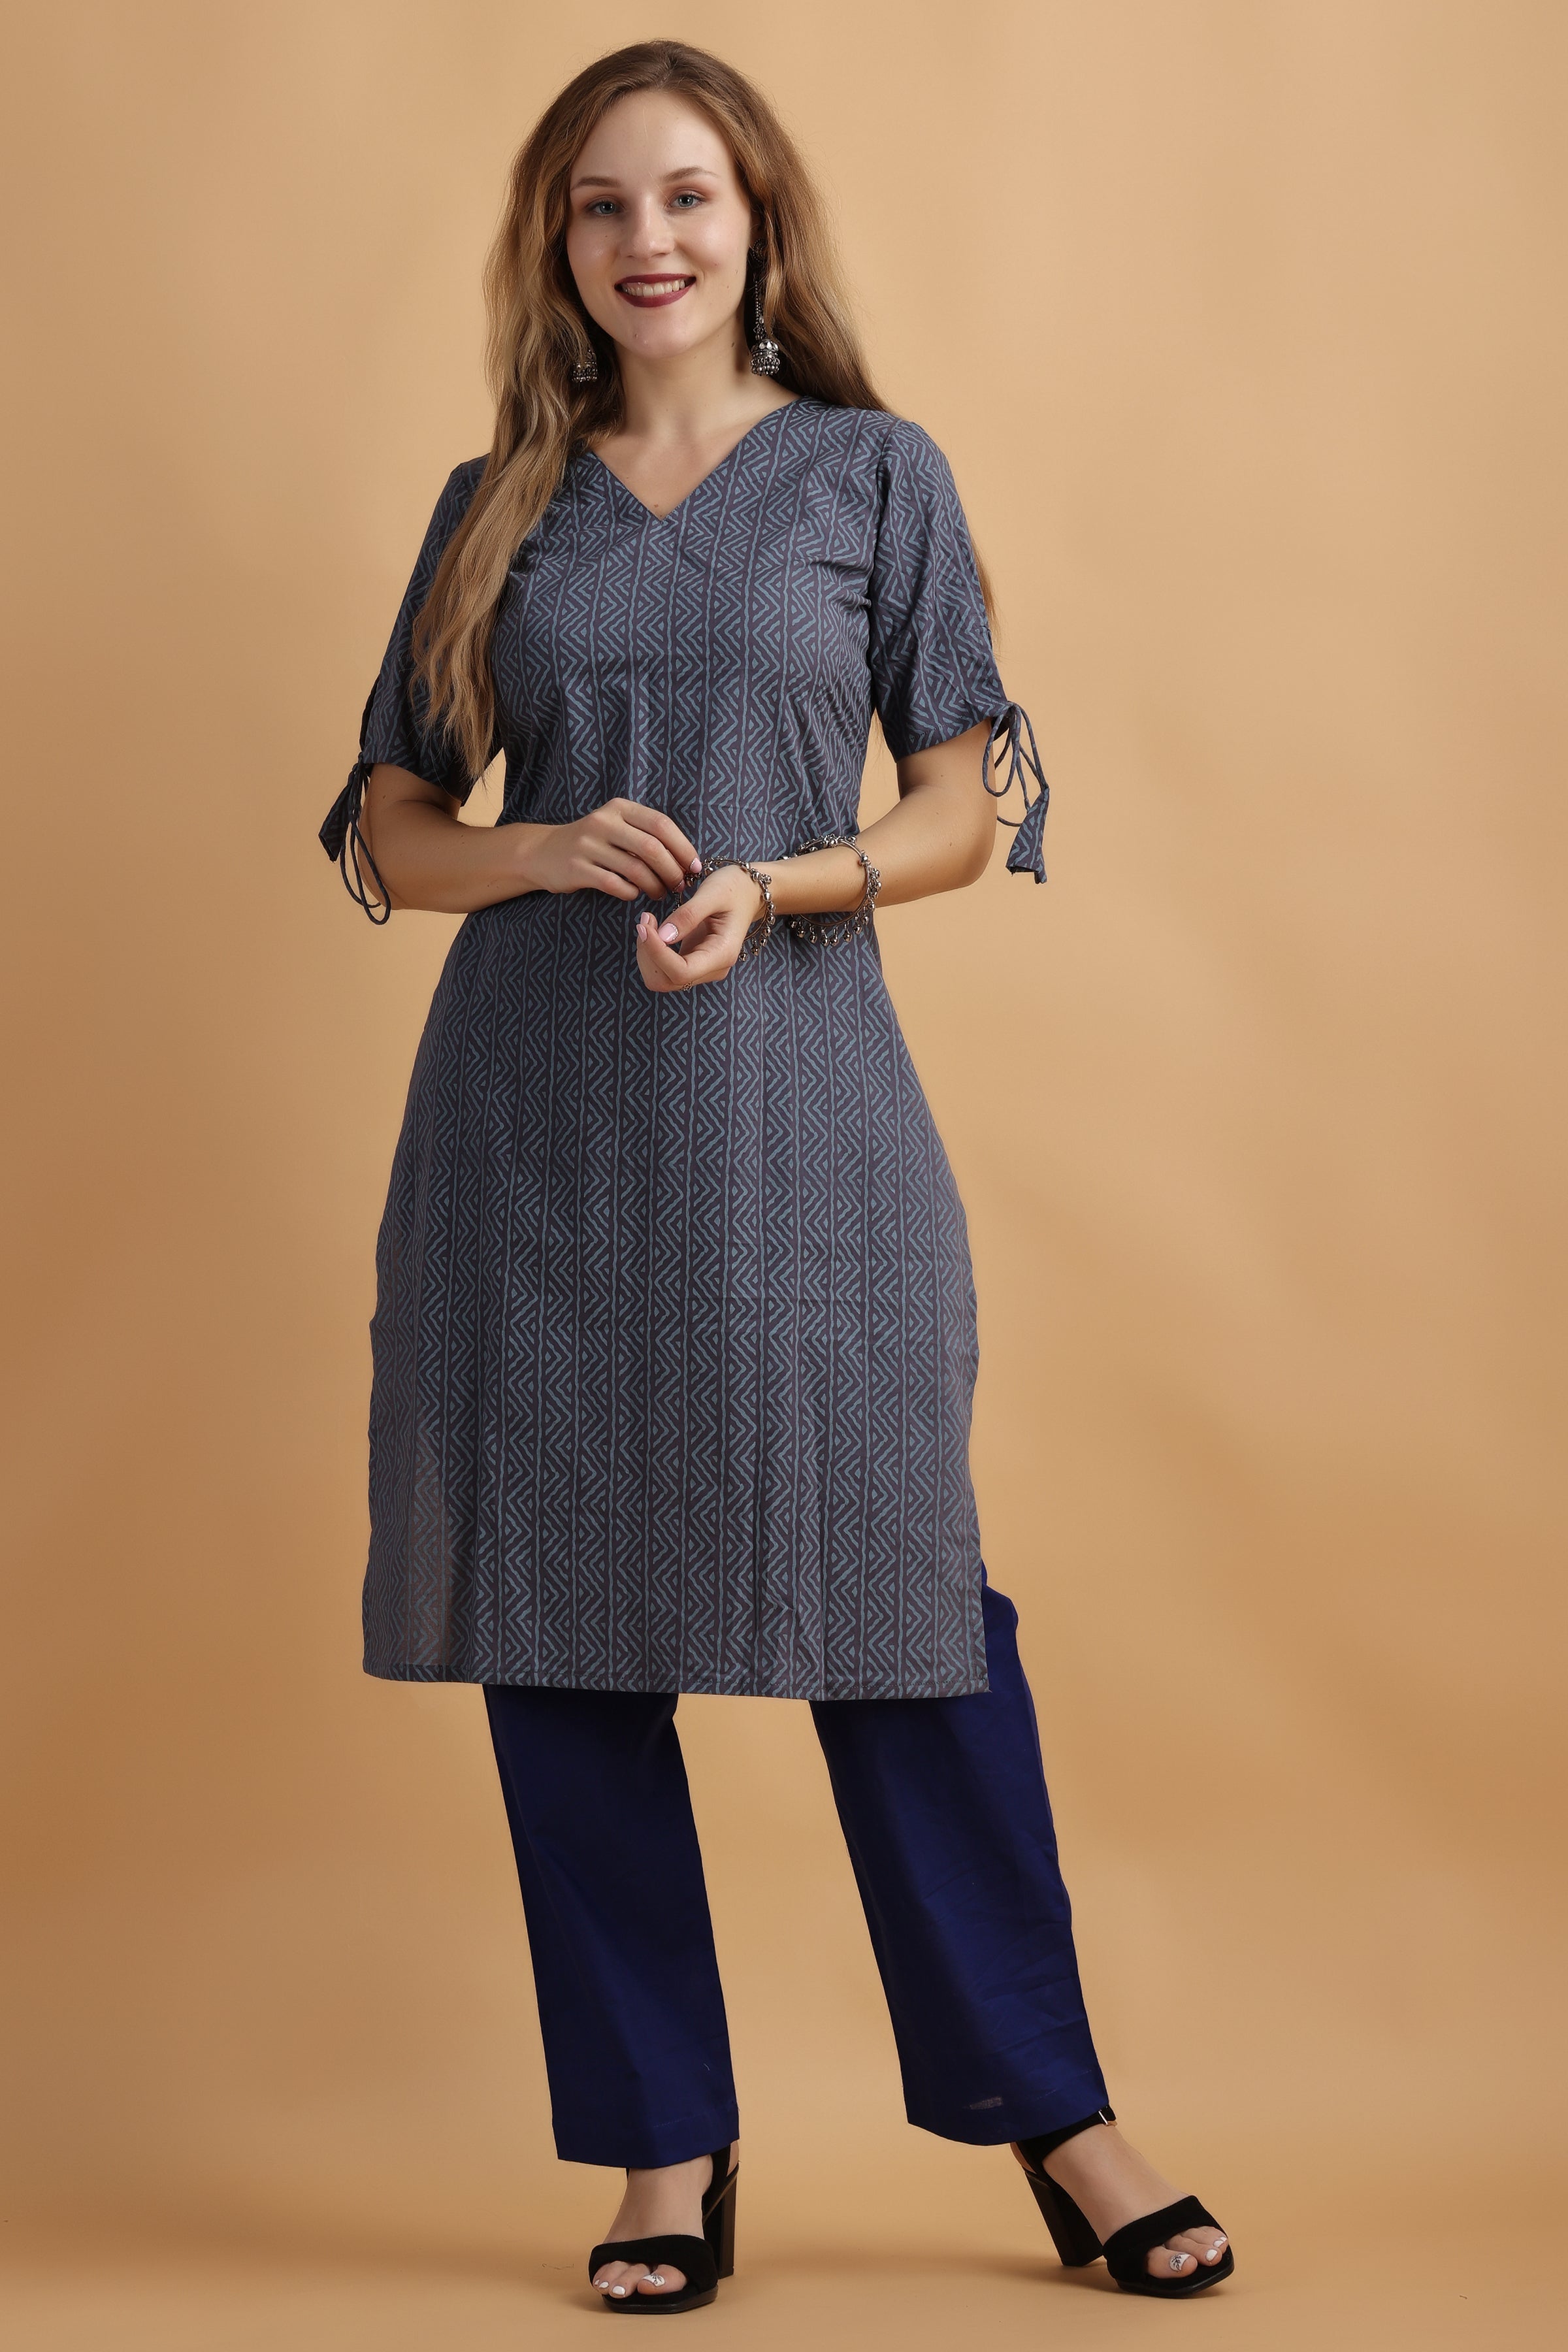 40-L And 44-XXL And XXL-46 Pure Cotton Kurti Palazzo Set at Rs 625/set in  Jaipur